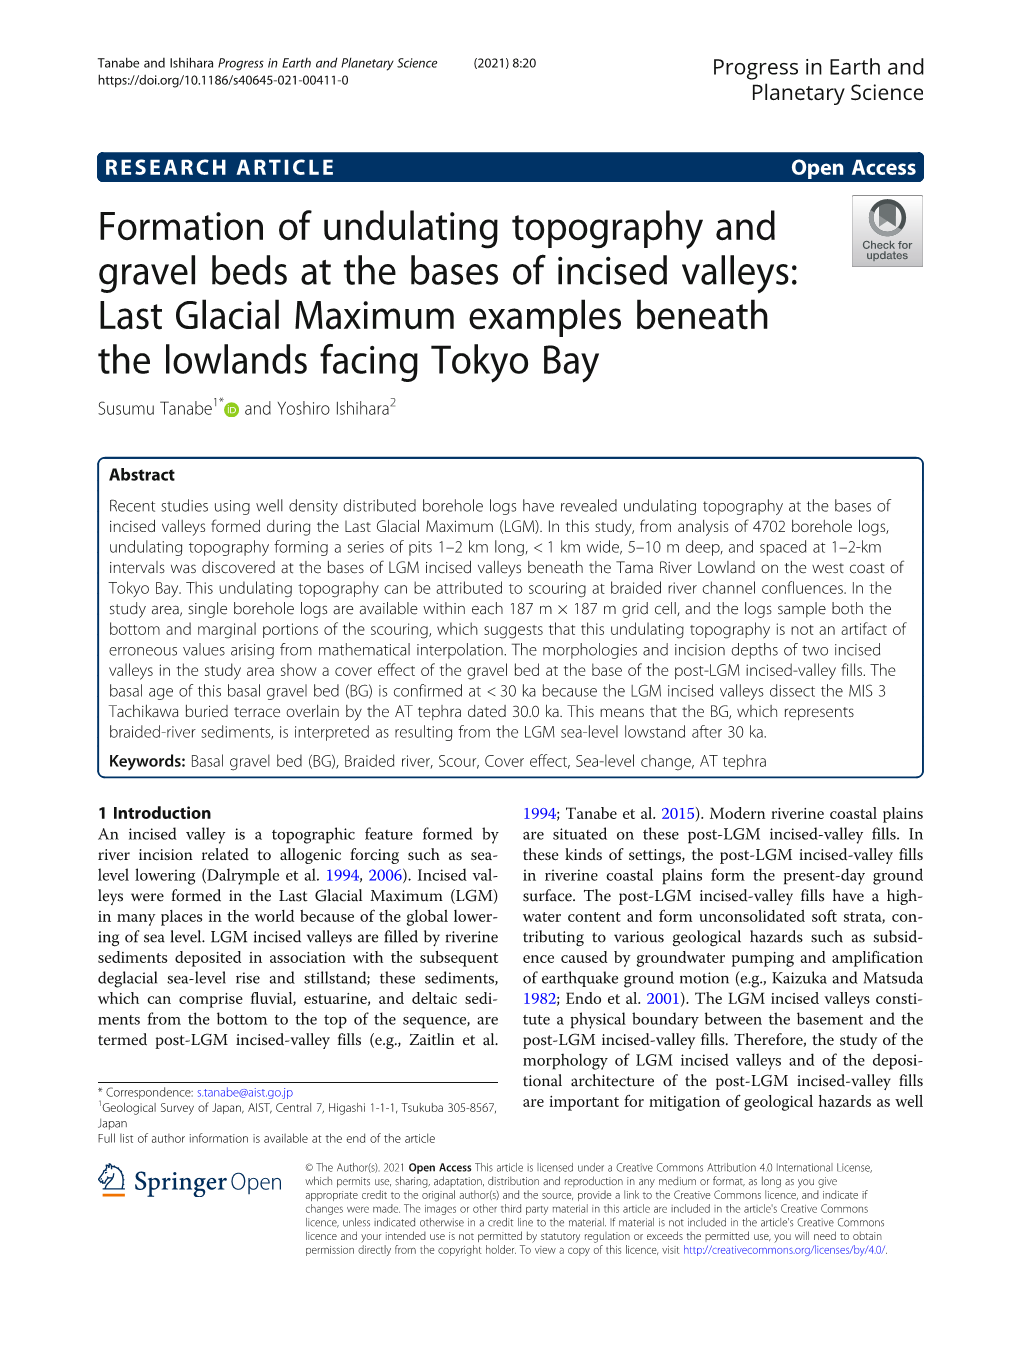 Formation of Undulating Topography and Gravel Beds at the Bases Of